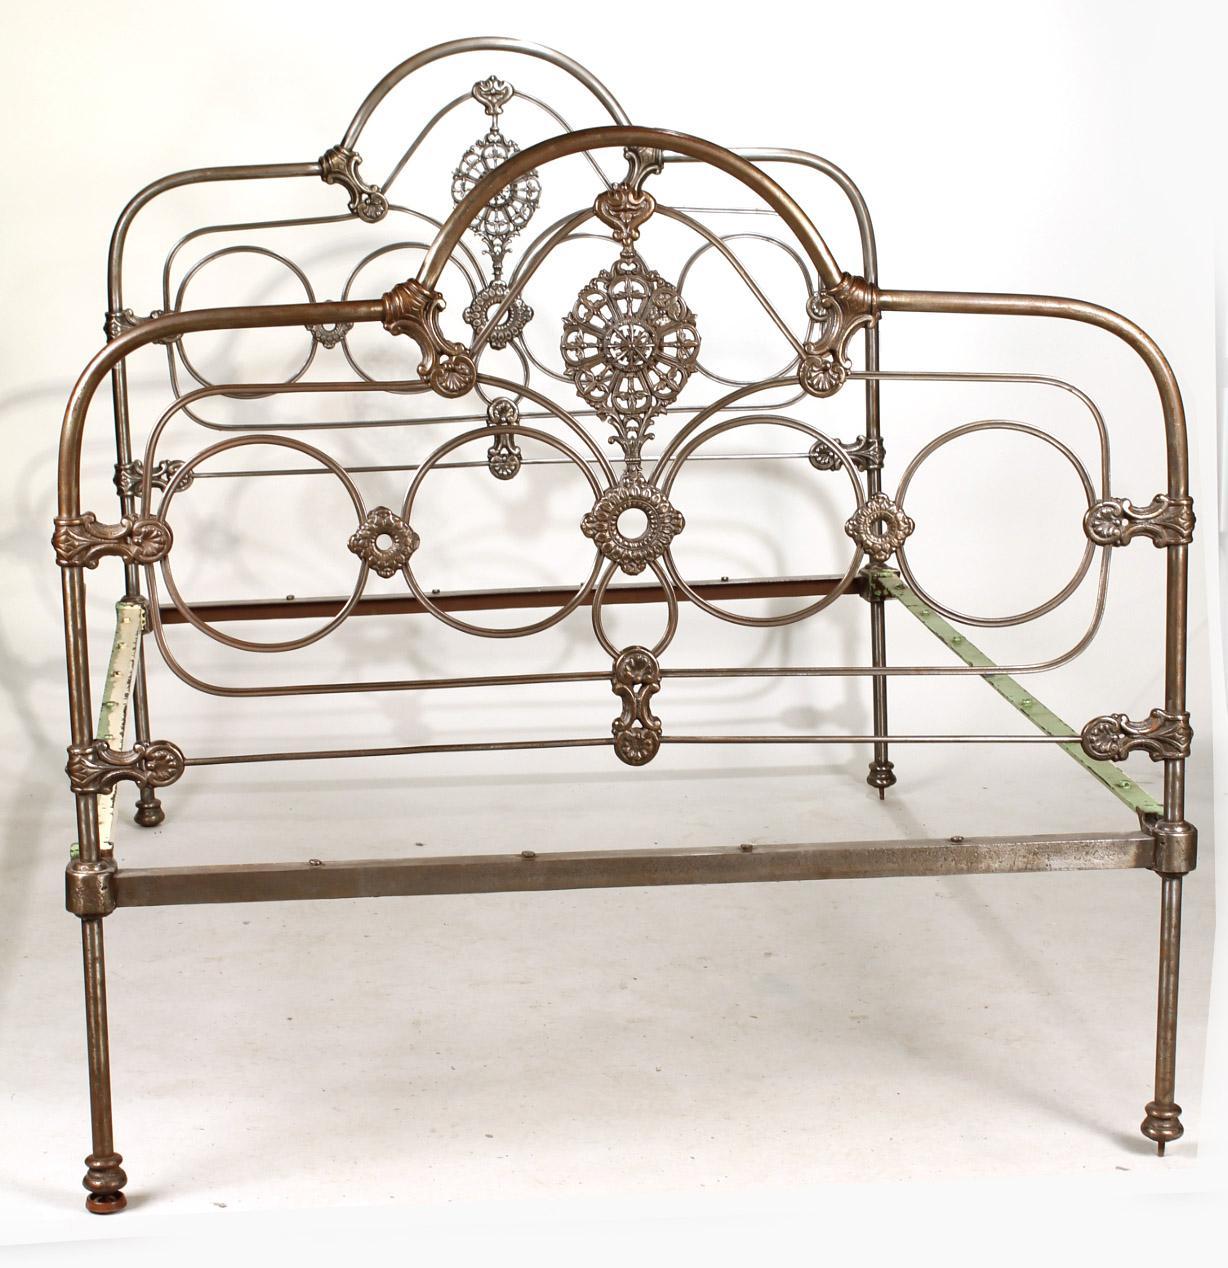 Cast in iron, this bed has all the elegance of that far away era, decorated with medallions and circles. The railings and stretchers of the head and foot boards have widely spaced flat-headed pegs to which cording may be attached to hold a double